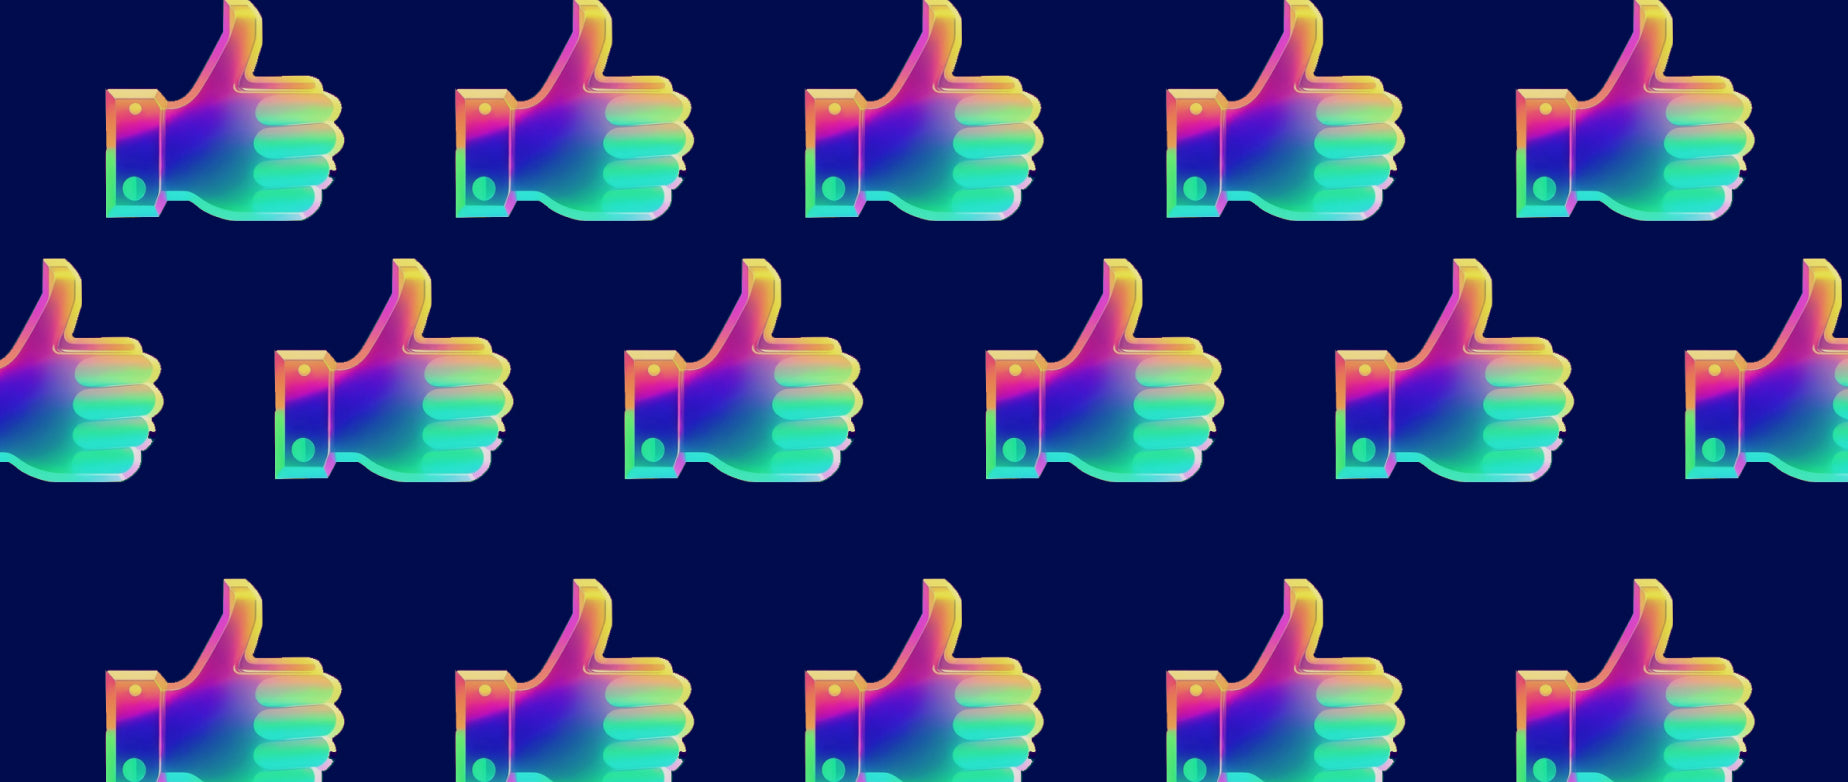 repeating images of hands in a thumbs up position: influencer media kit